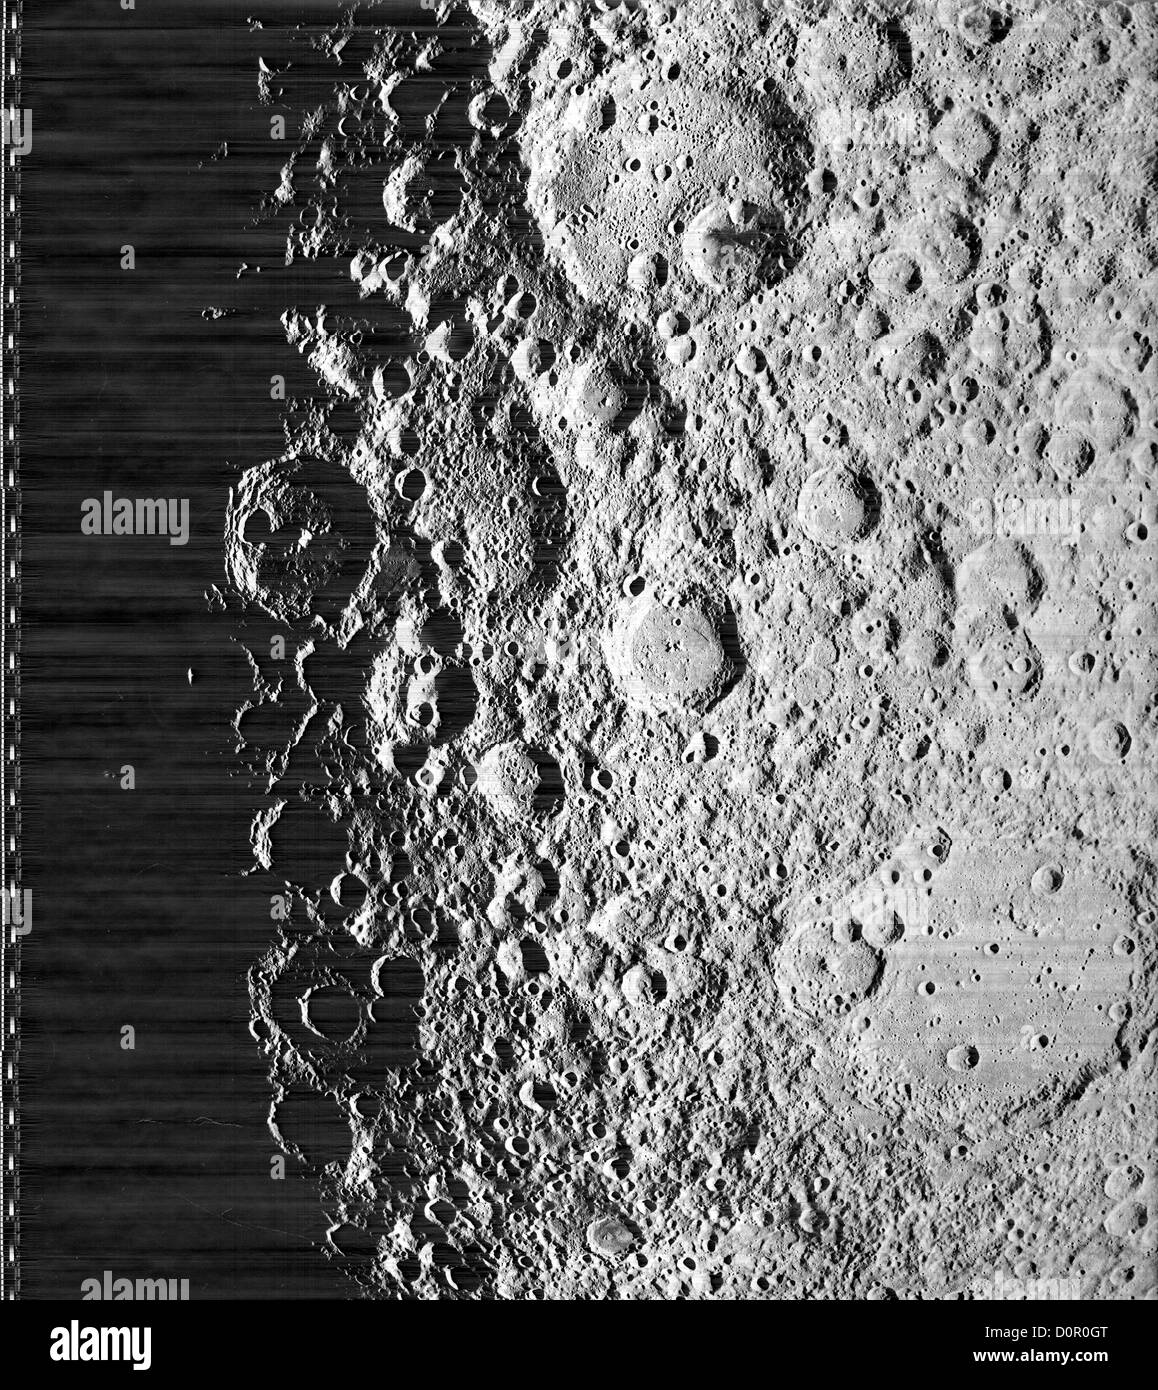 NASA image from Lunar Orbiter of the moon surface Stock Photo